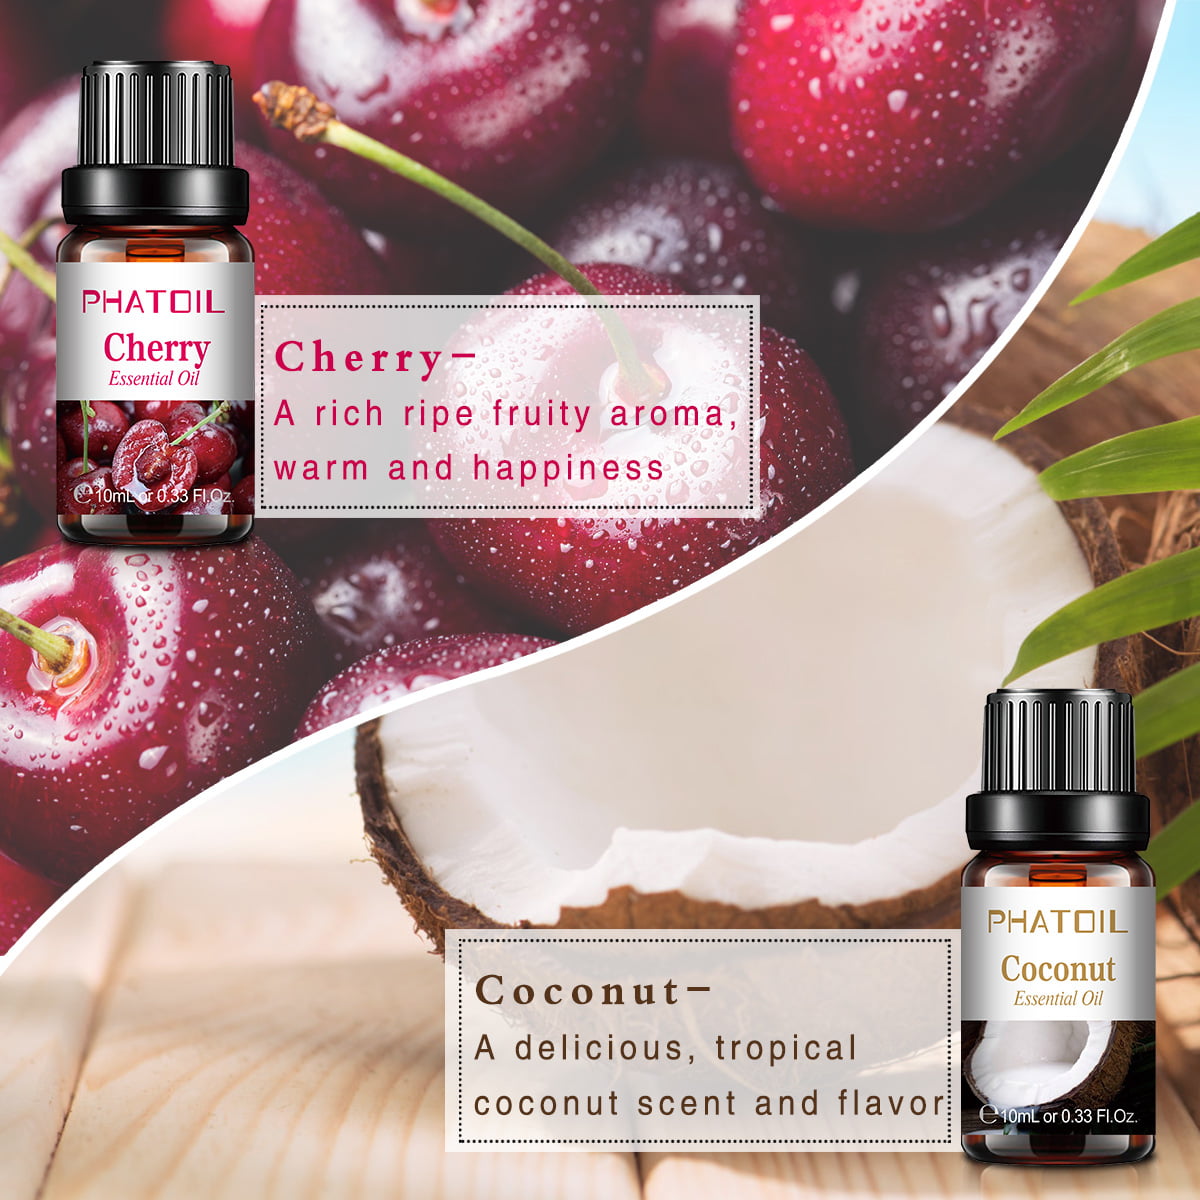 PHATOIL 0.33fl.oz Cherry Essential Oils for Aromatherapy, Diffuser, Yoga,  Skin Care, DIY Candle and Soap Making - 10ml